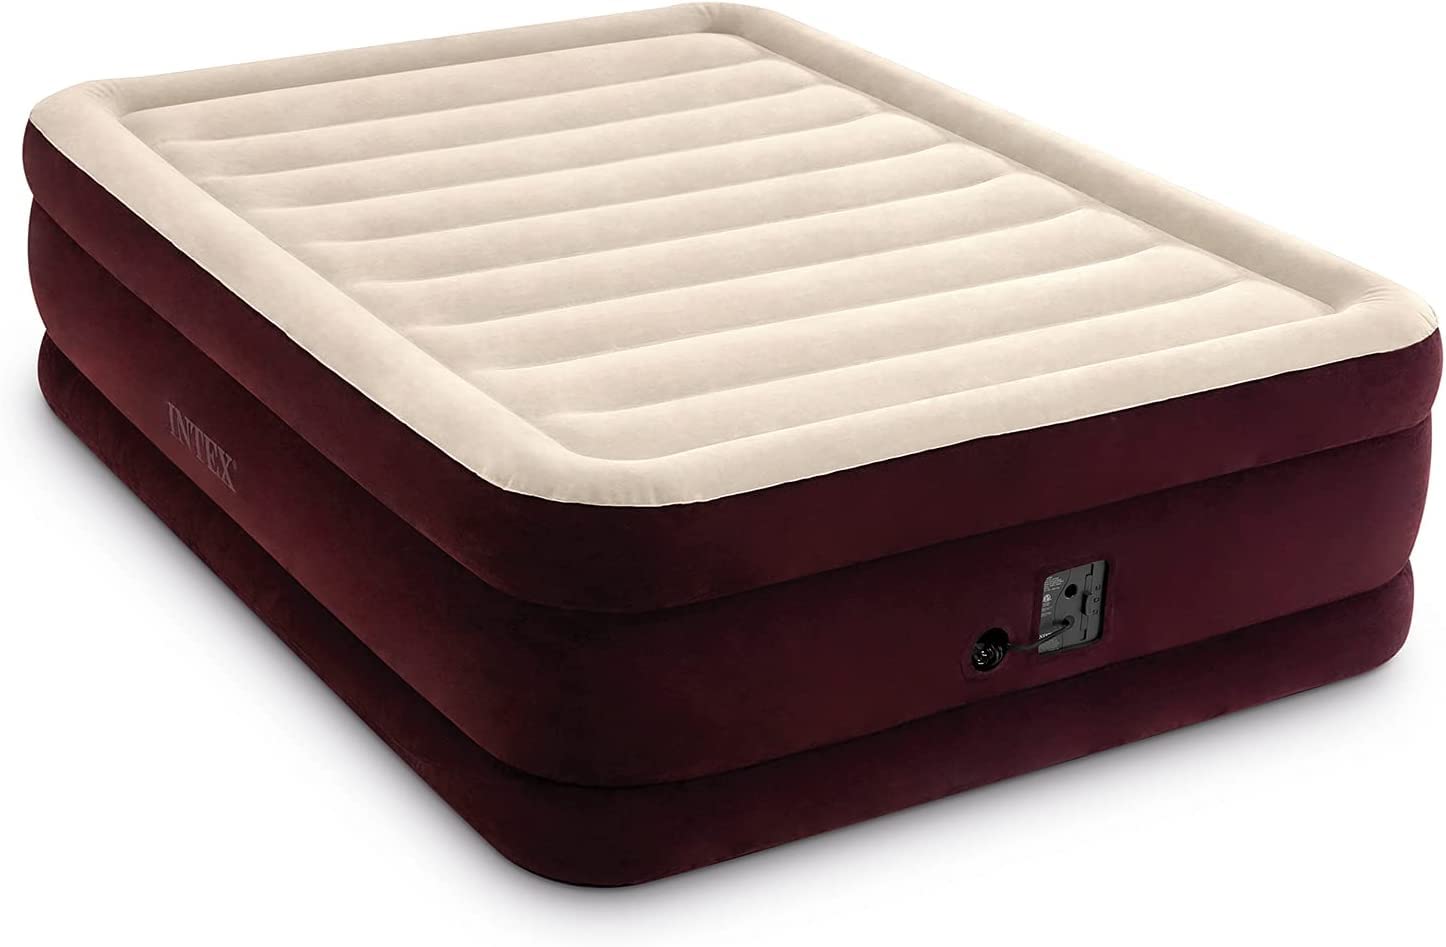 Intex 64739WB Dura-Beam Extra Raised Airbed: Queen Size - Built-in Electric Pump - 20in Bed Height - 600lb Weight capacity - Mar